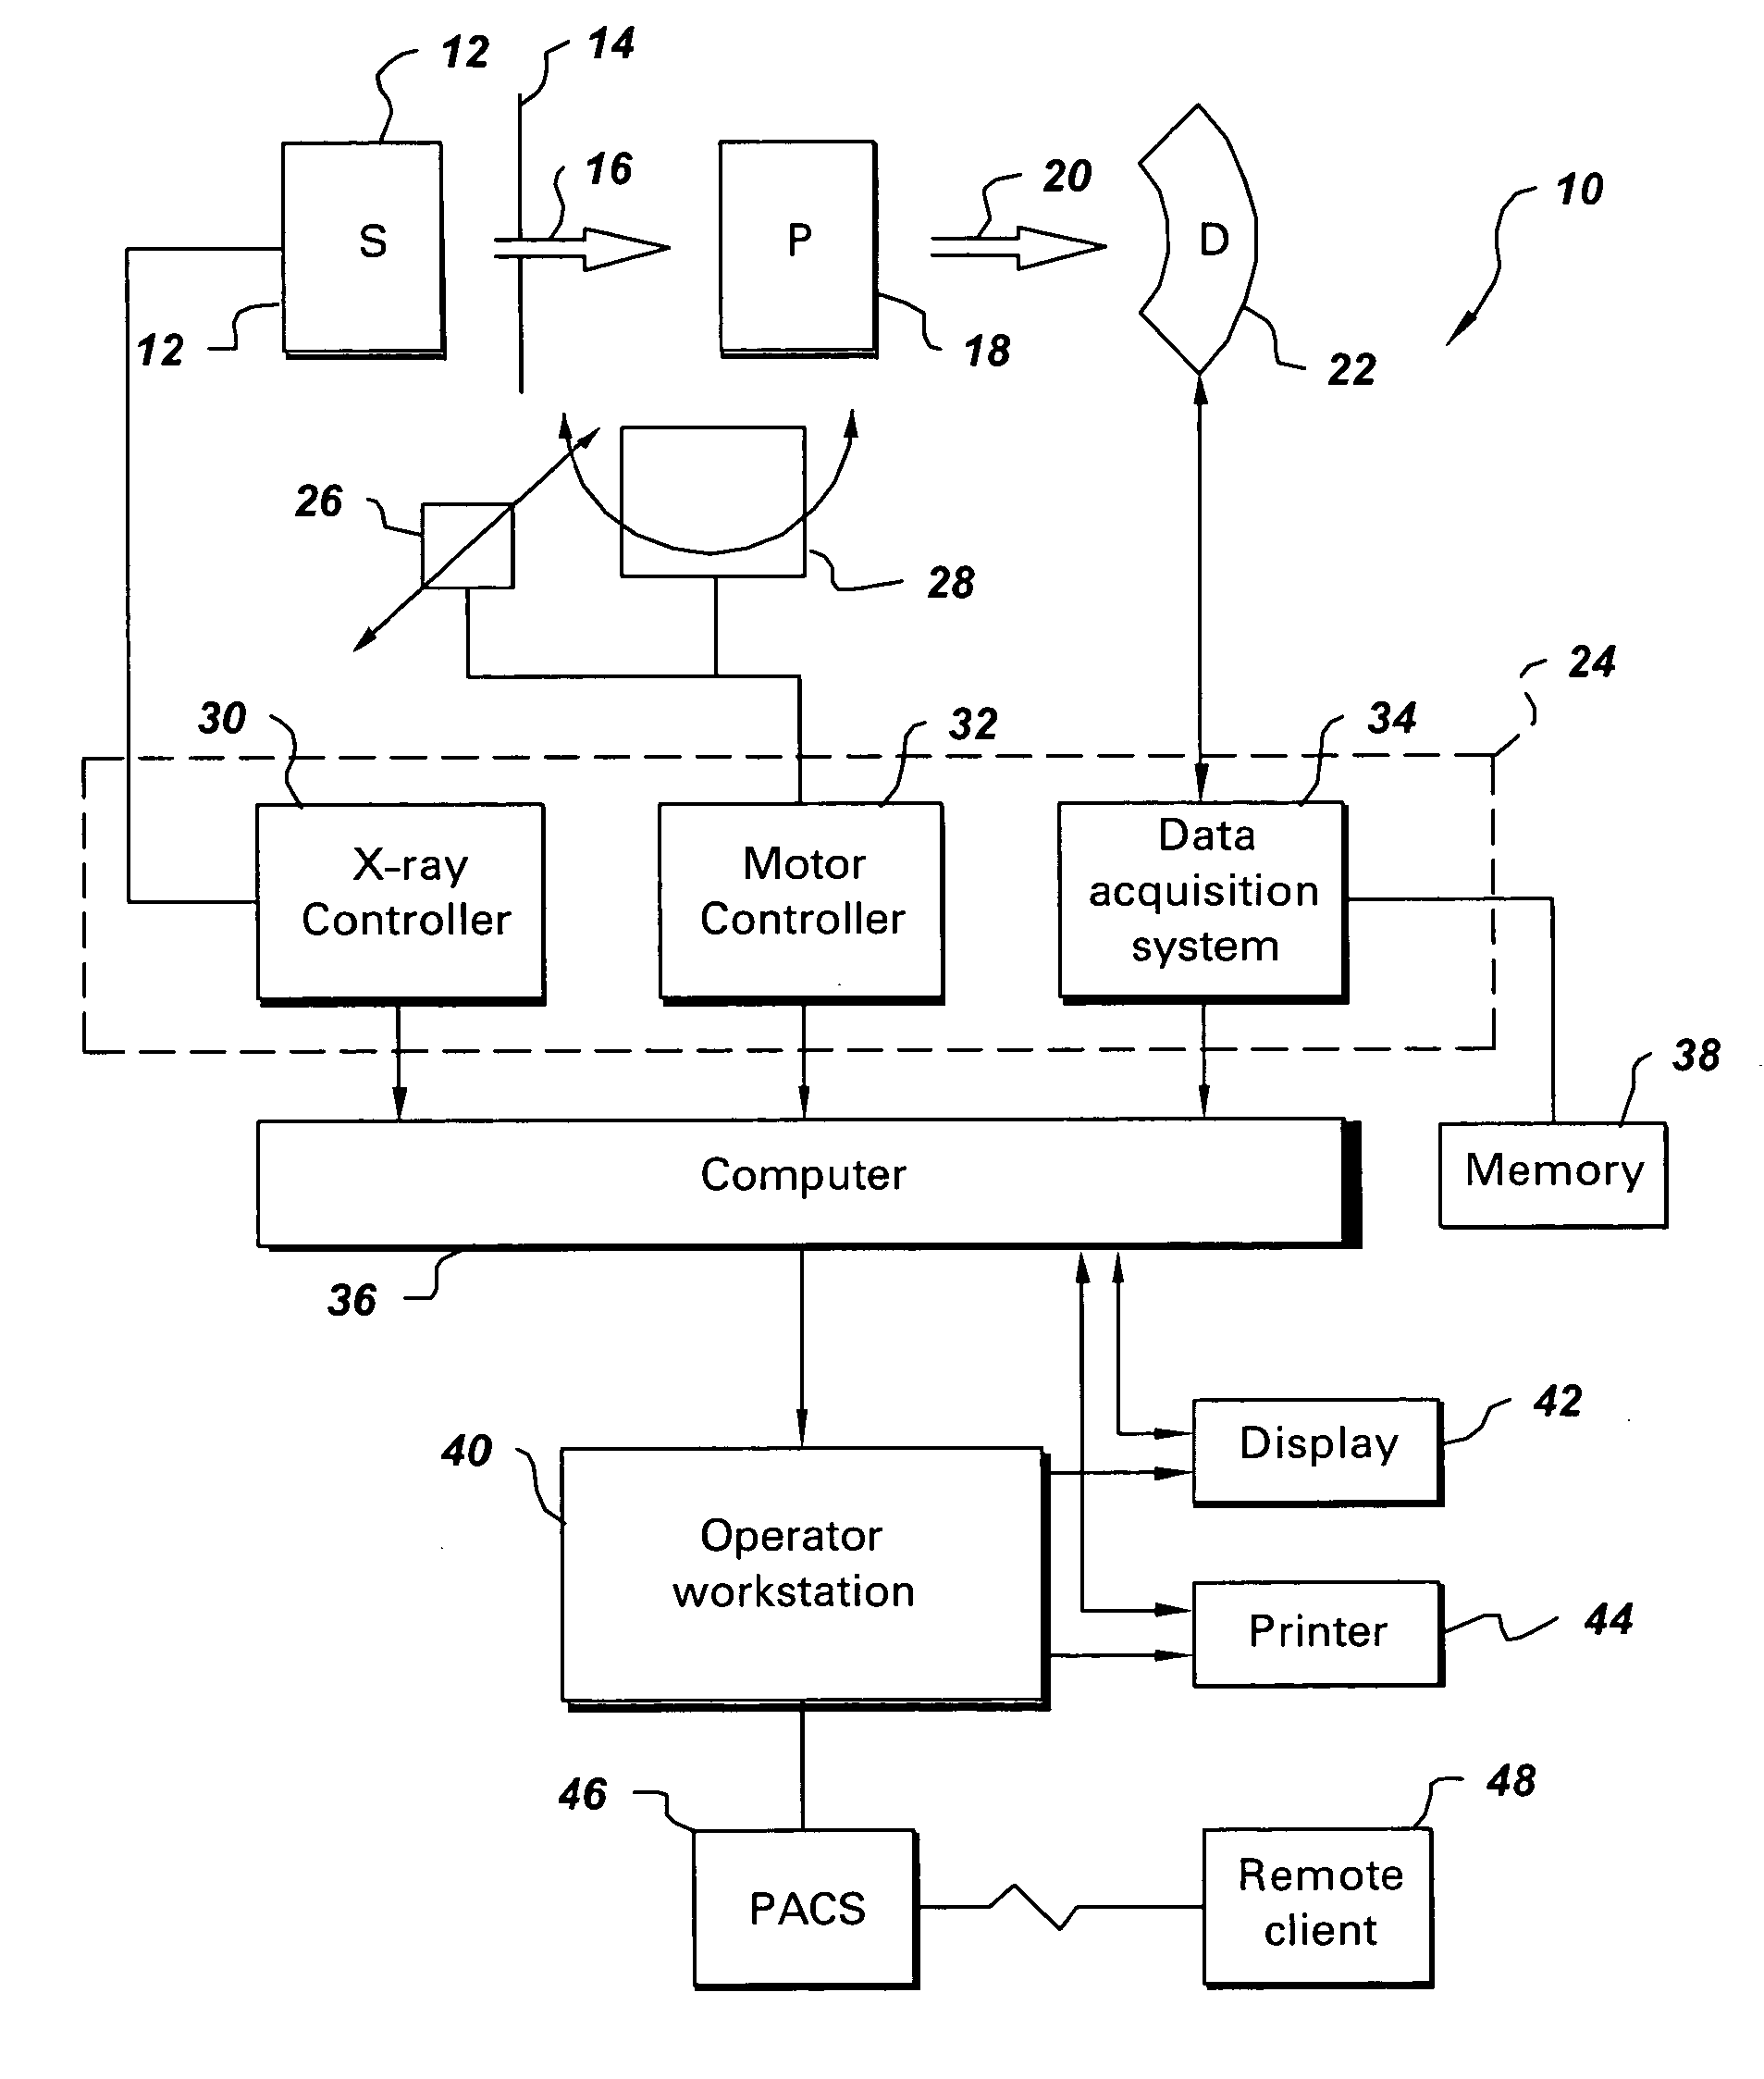 Method and system for CT imaging using a distributed X-ray source and interpolation based reconstruction